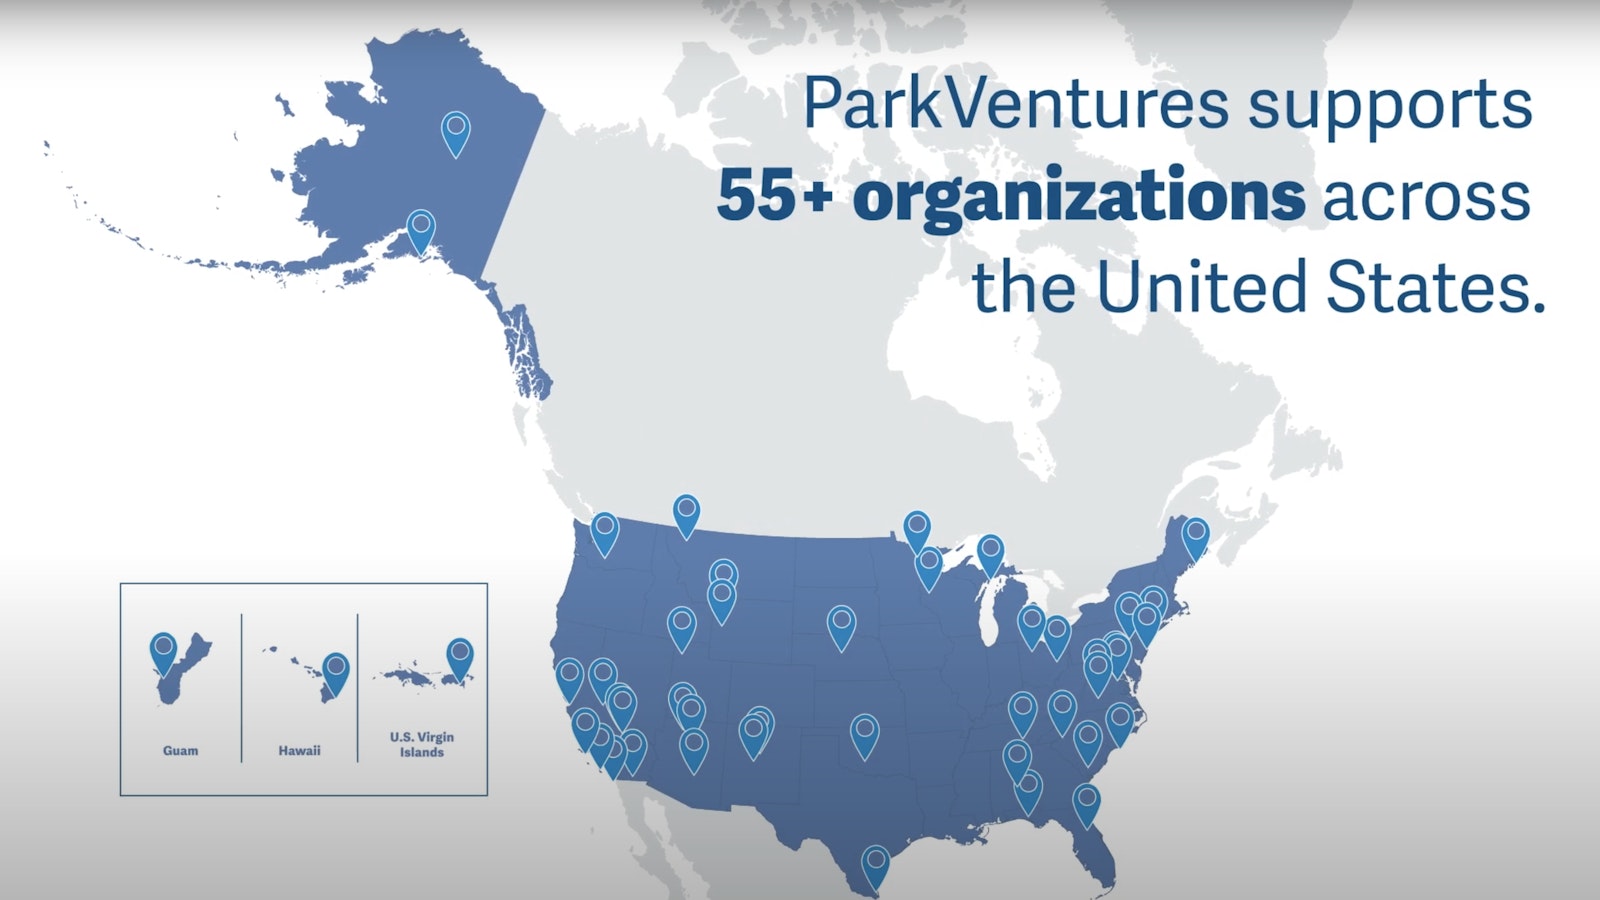 An illustration of the U.S. and icons to signify where NPF's ParkVentures program has supported programming